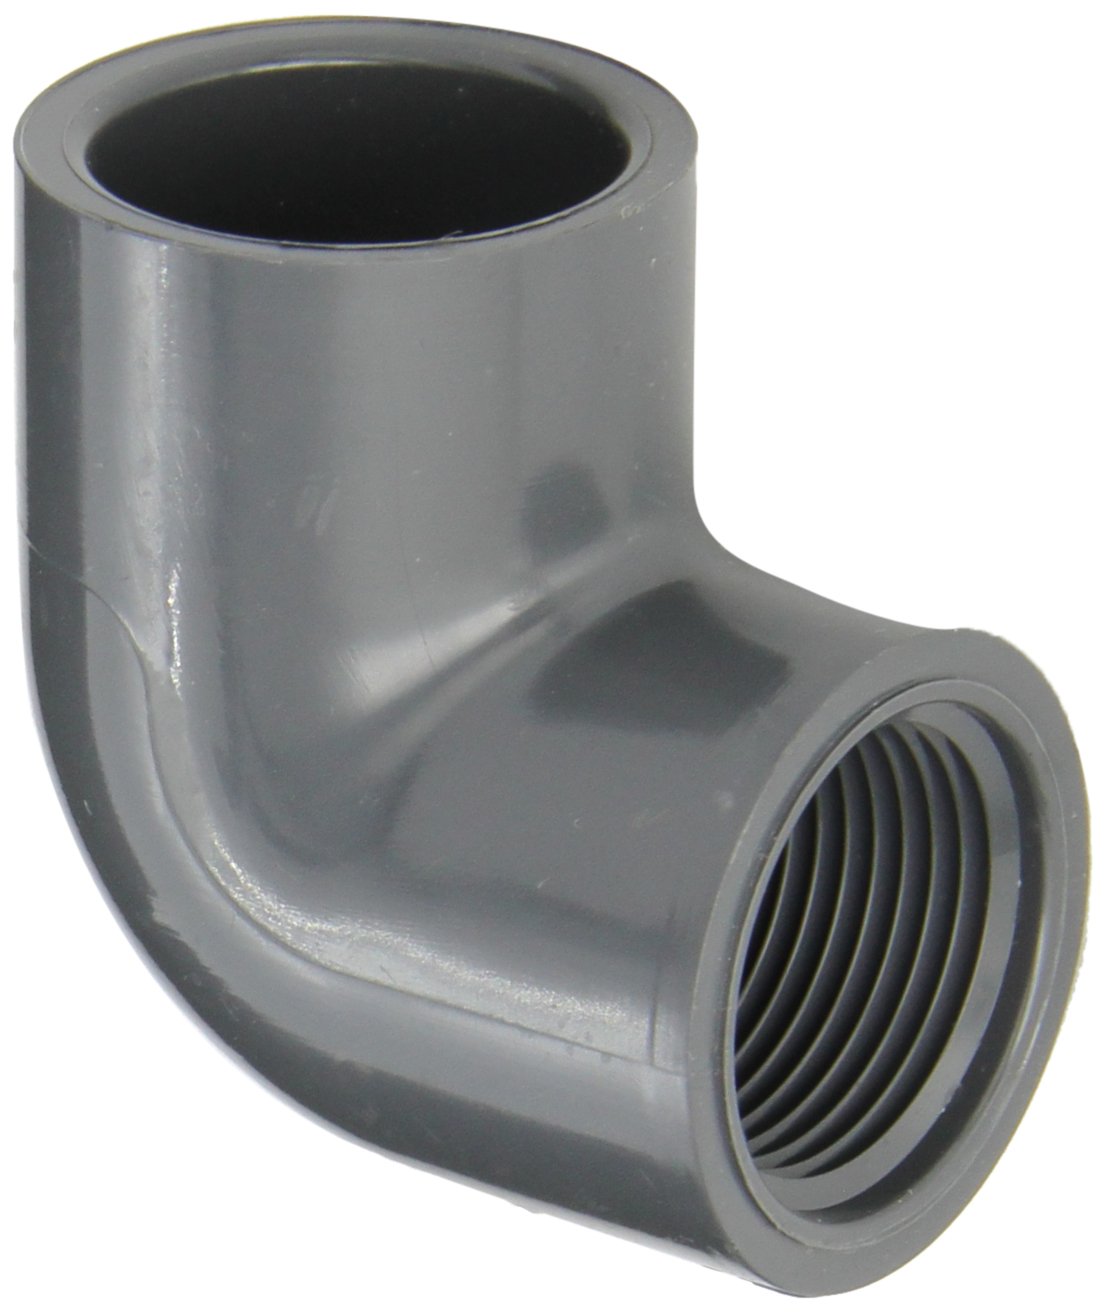 807-015 - 1-1/2" PVC Schedule 80 90 Degree Elbow (S x FPT)